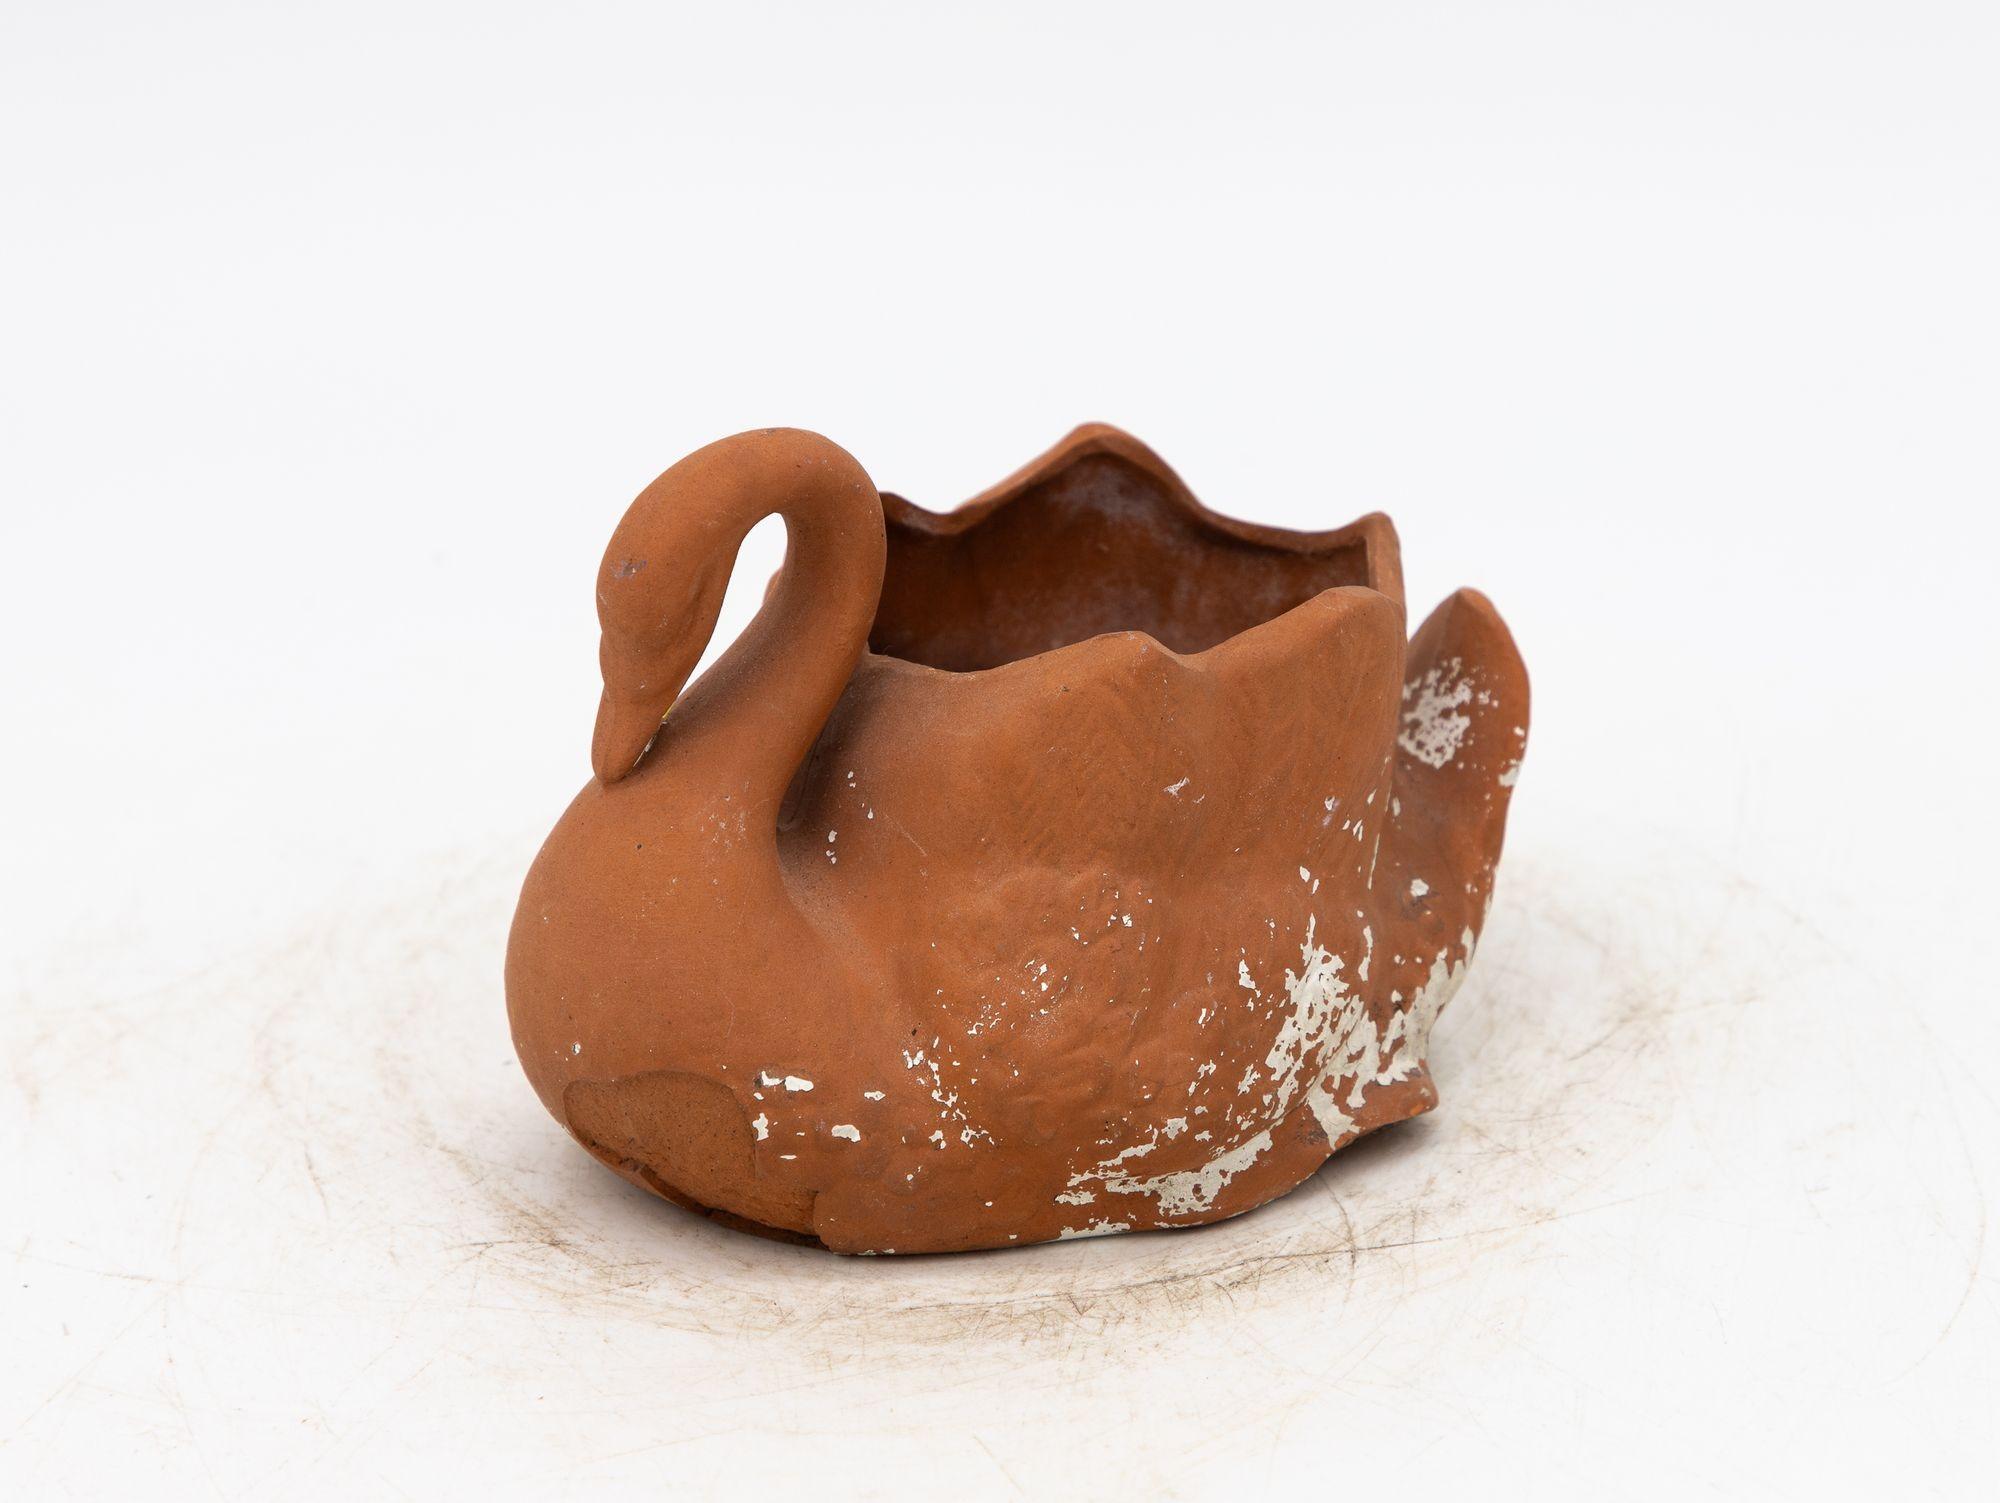 This small tabletop terracotta planter, shaped like a swan with a gracefully curved neck, dates back to the late 20th century. It features remnants of white paint and some areas of terracotta loss, adding to its vintage charm. This unique piece